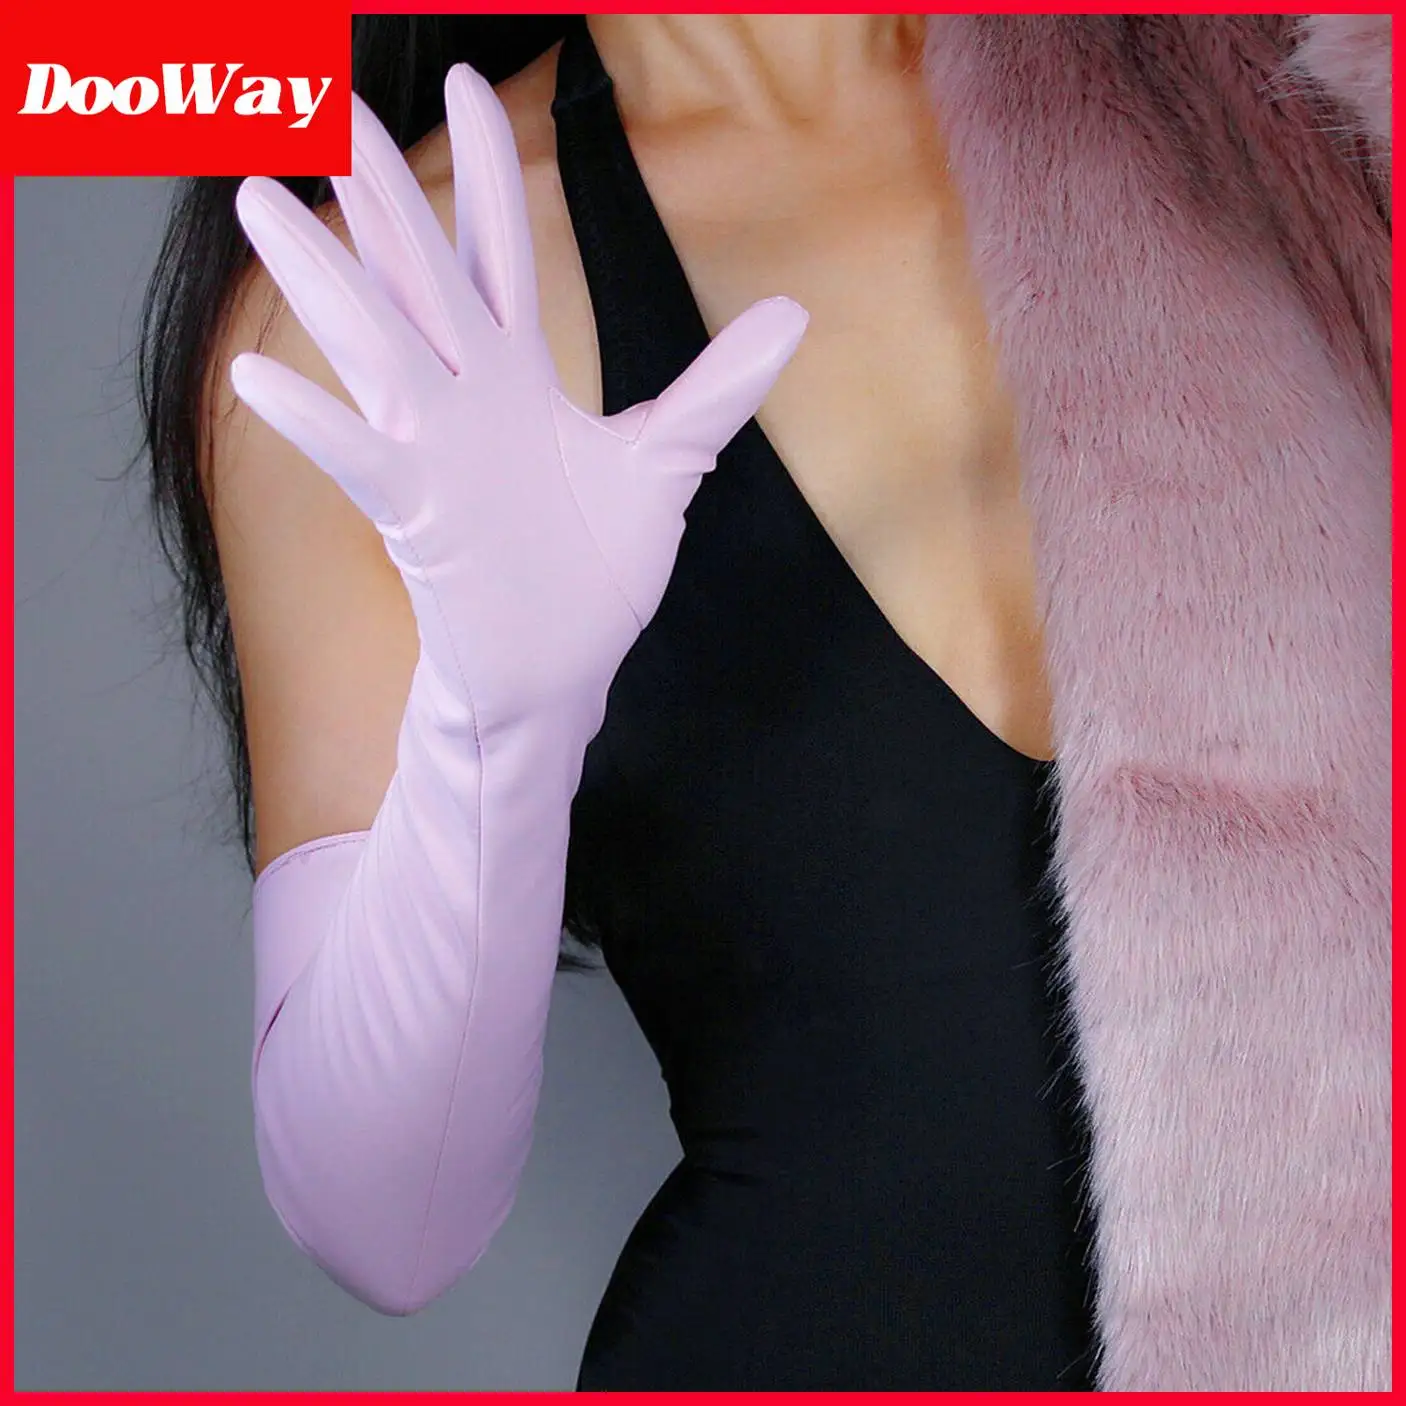 DooWay LONG LATEX GLOVES Faux Leather PU Light Pink Princess Evening Dress Opera Party Gloves